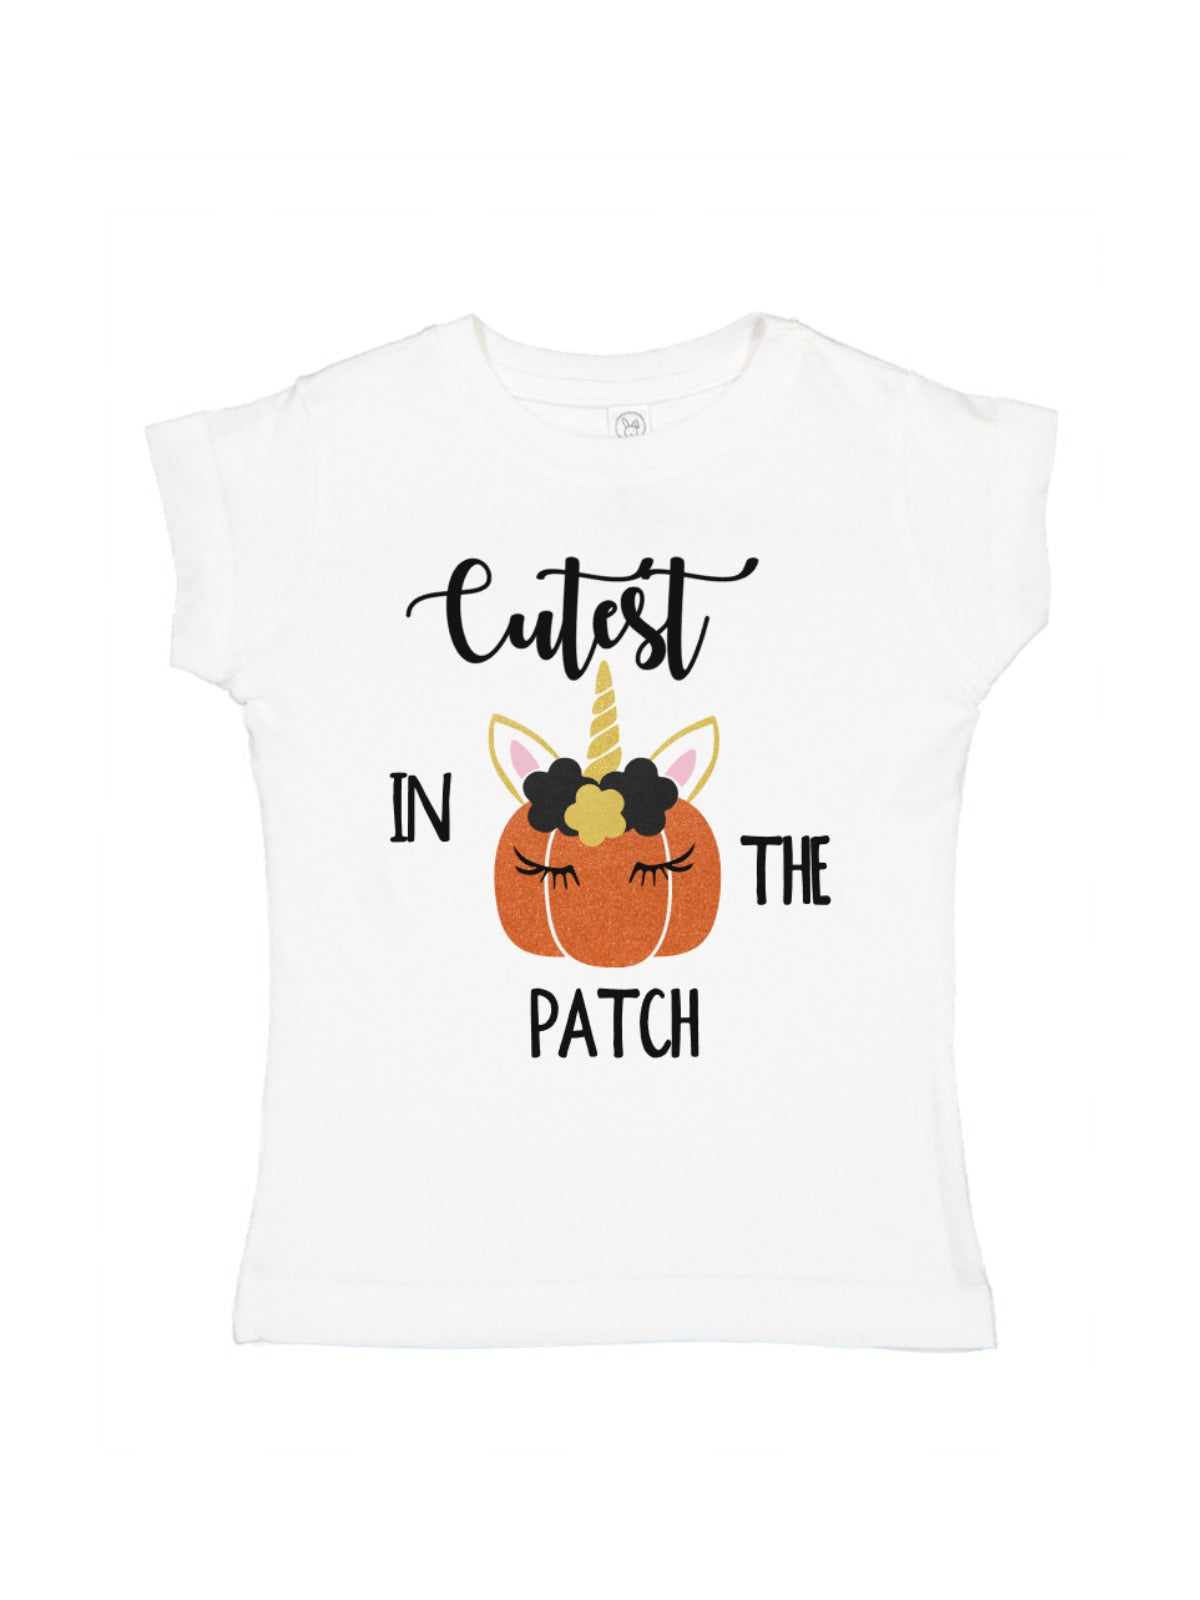 Cutest in the patch girl's halloween t-shirt